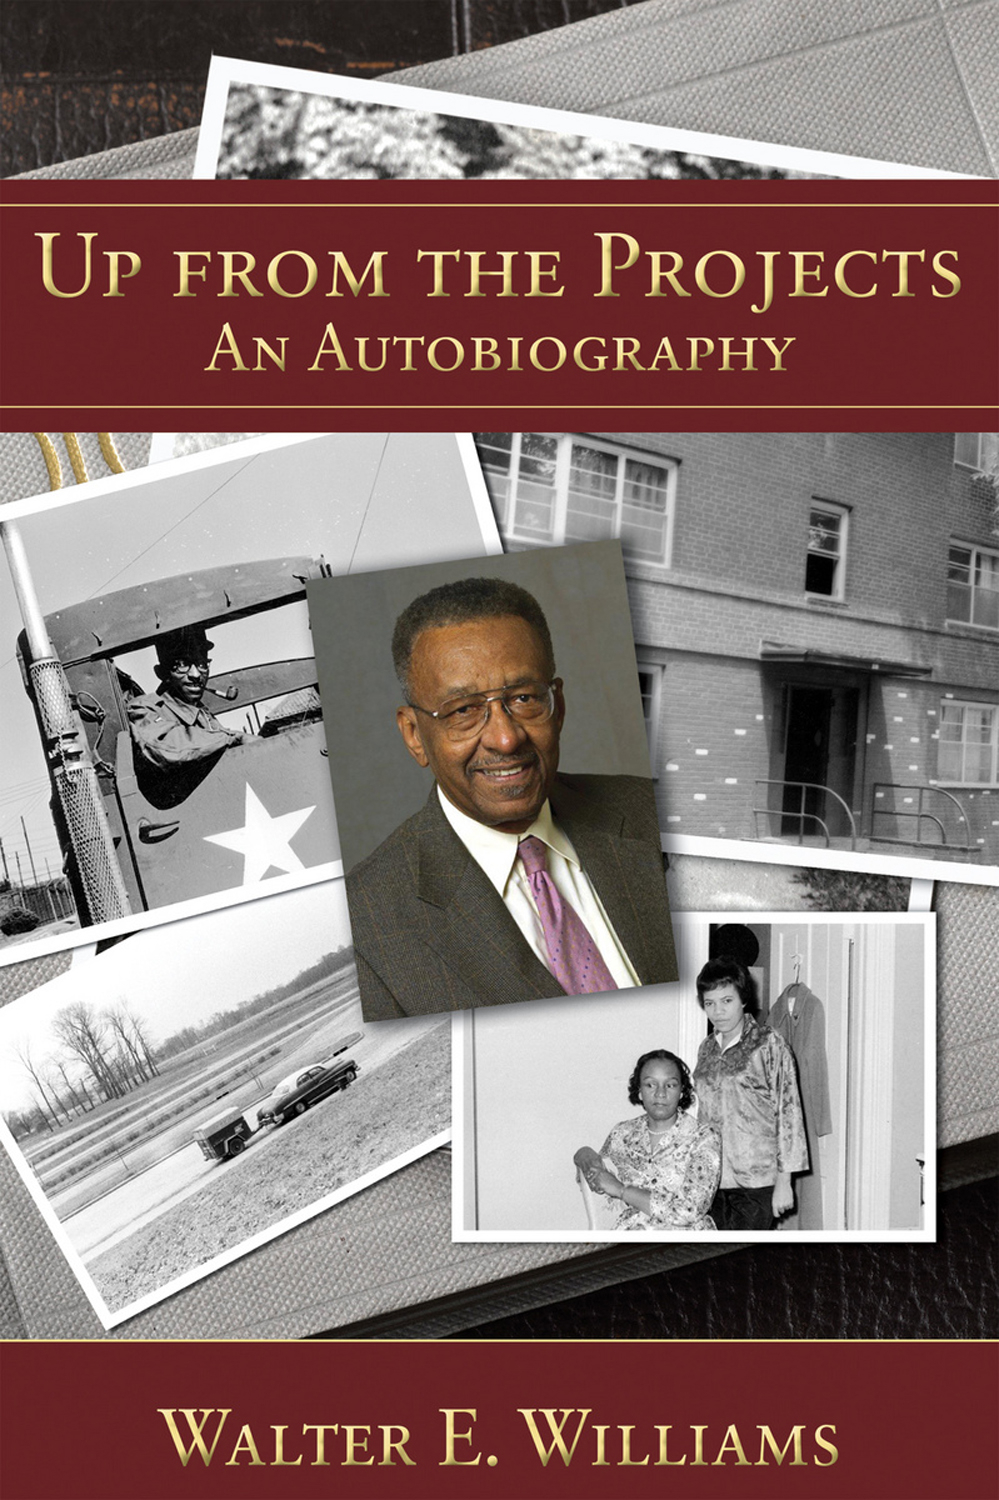 Up from the Projects - Walter E. Williams